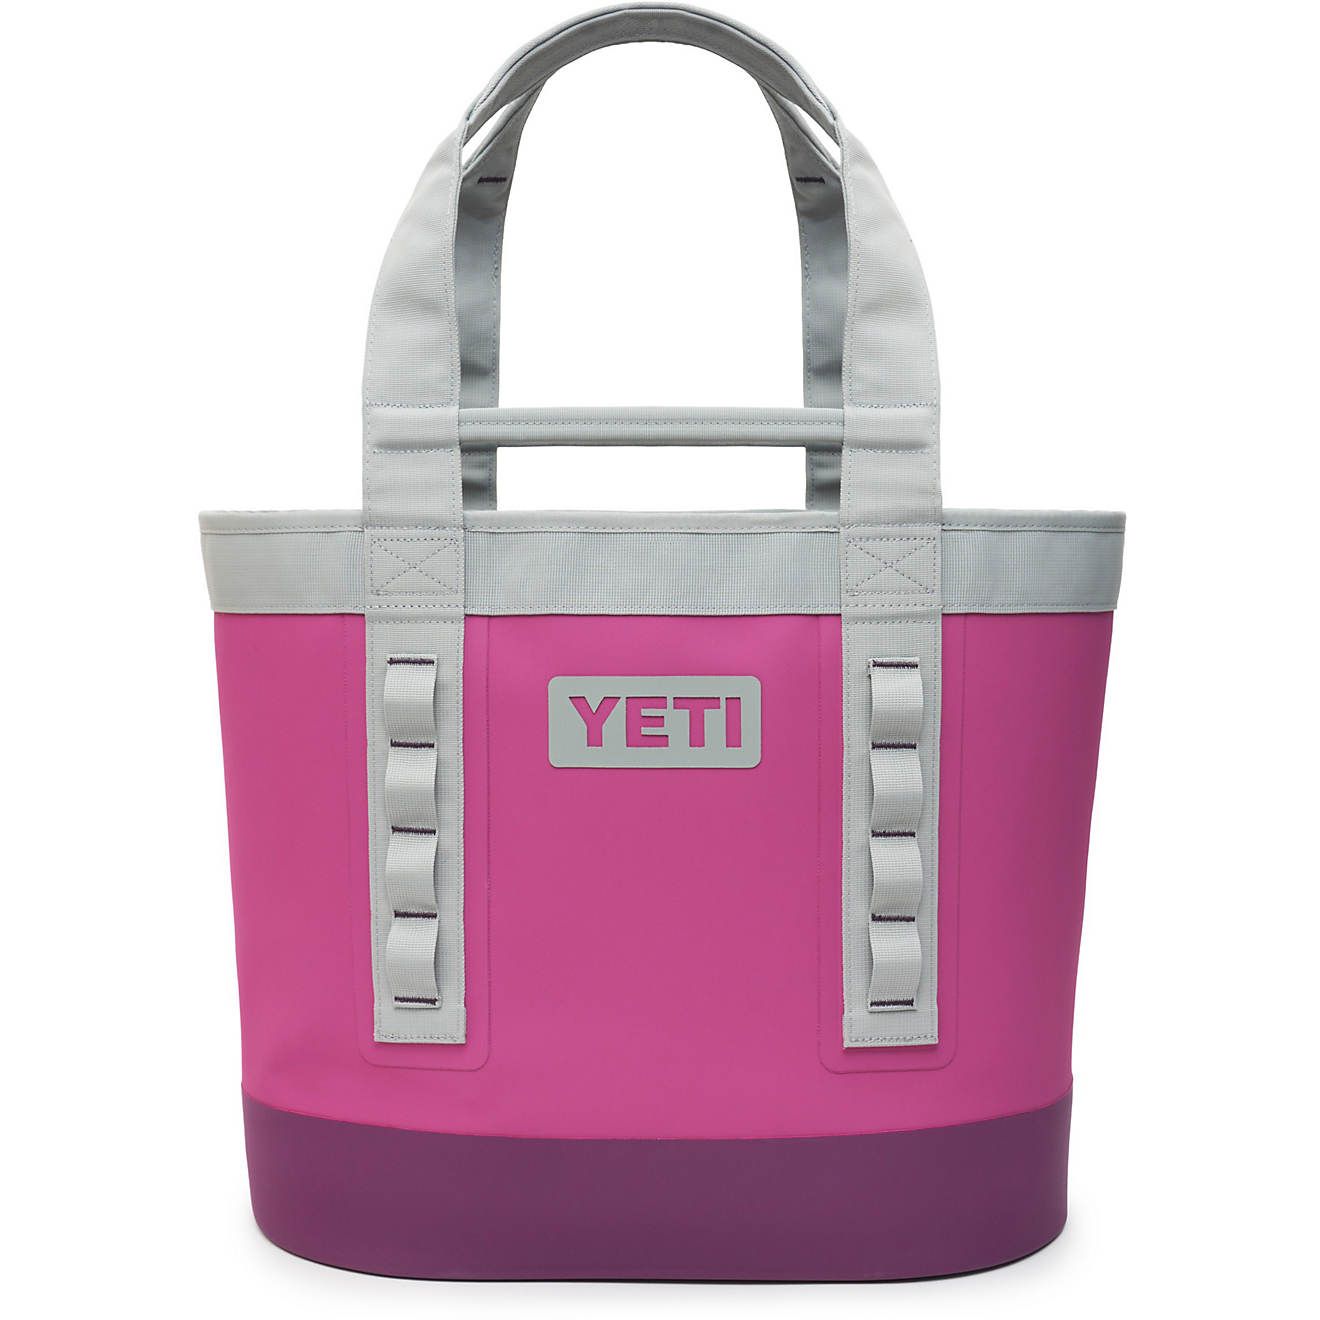 YETI Camino Carryall 35 Tote Bag | Academy Sports + Outdoors